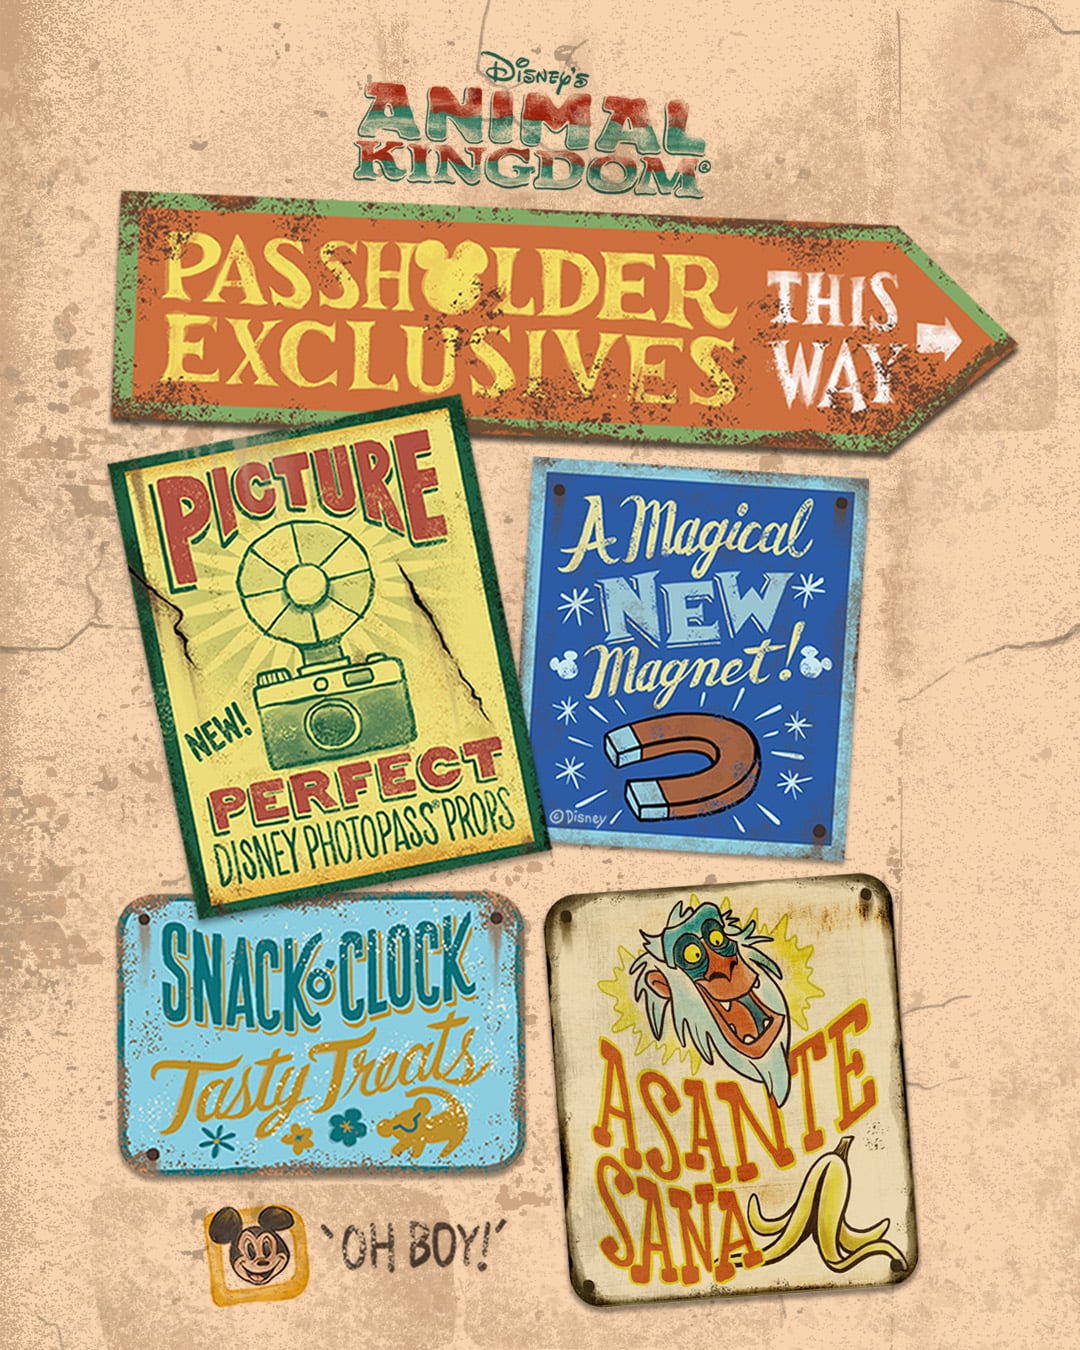 New Lion King Annual Passholder Magnet & More Coming Soon